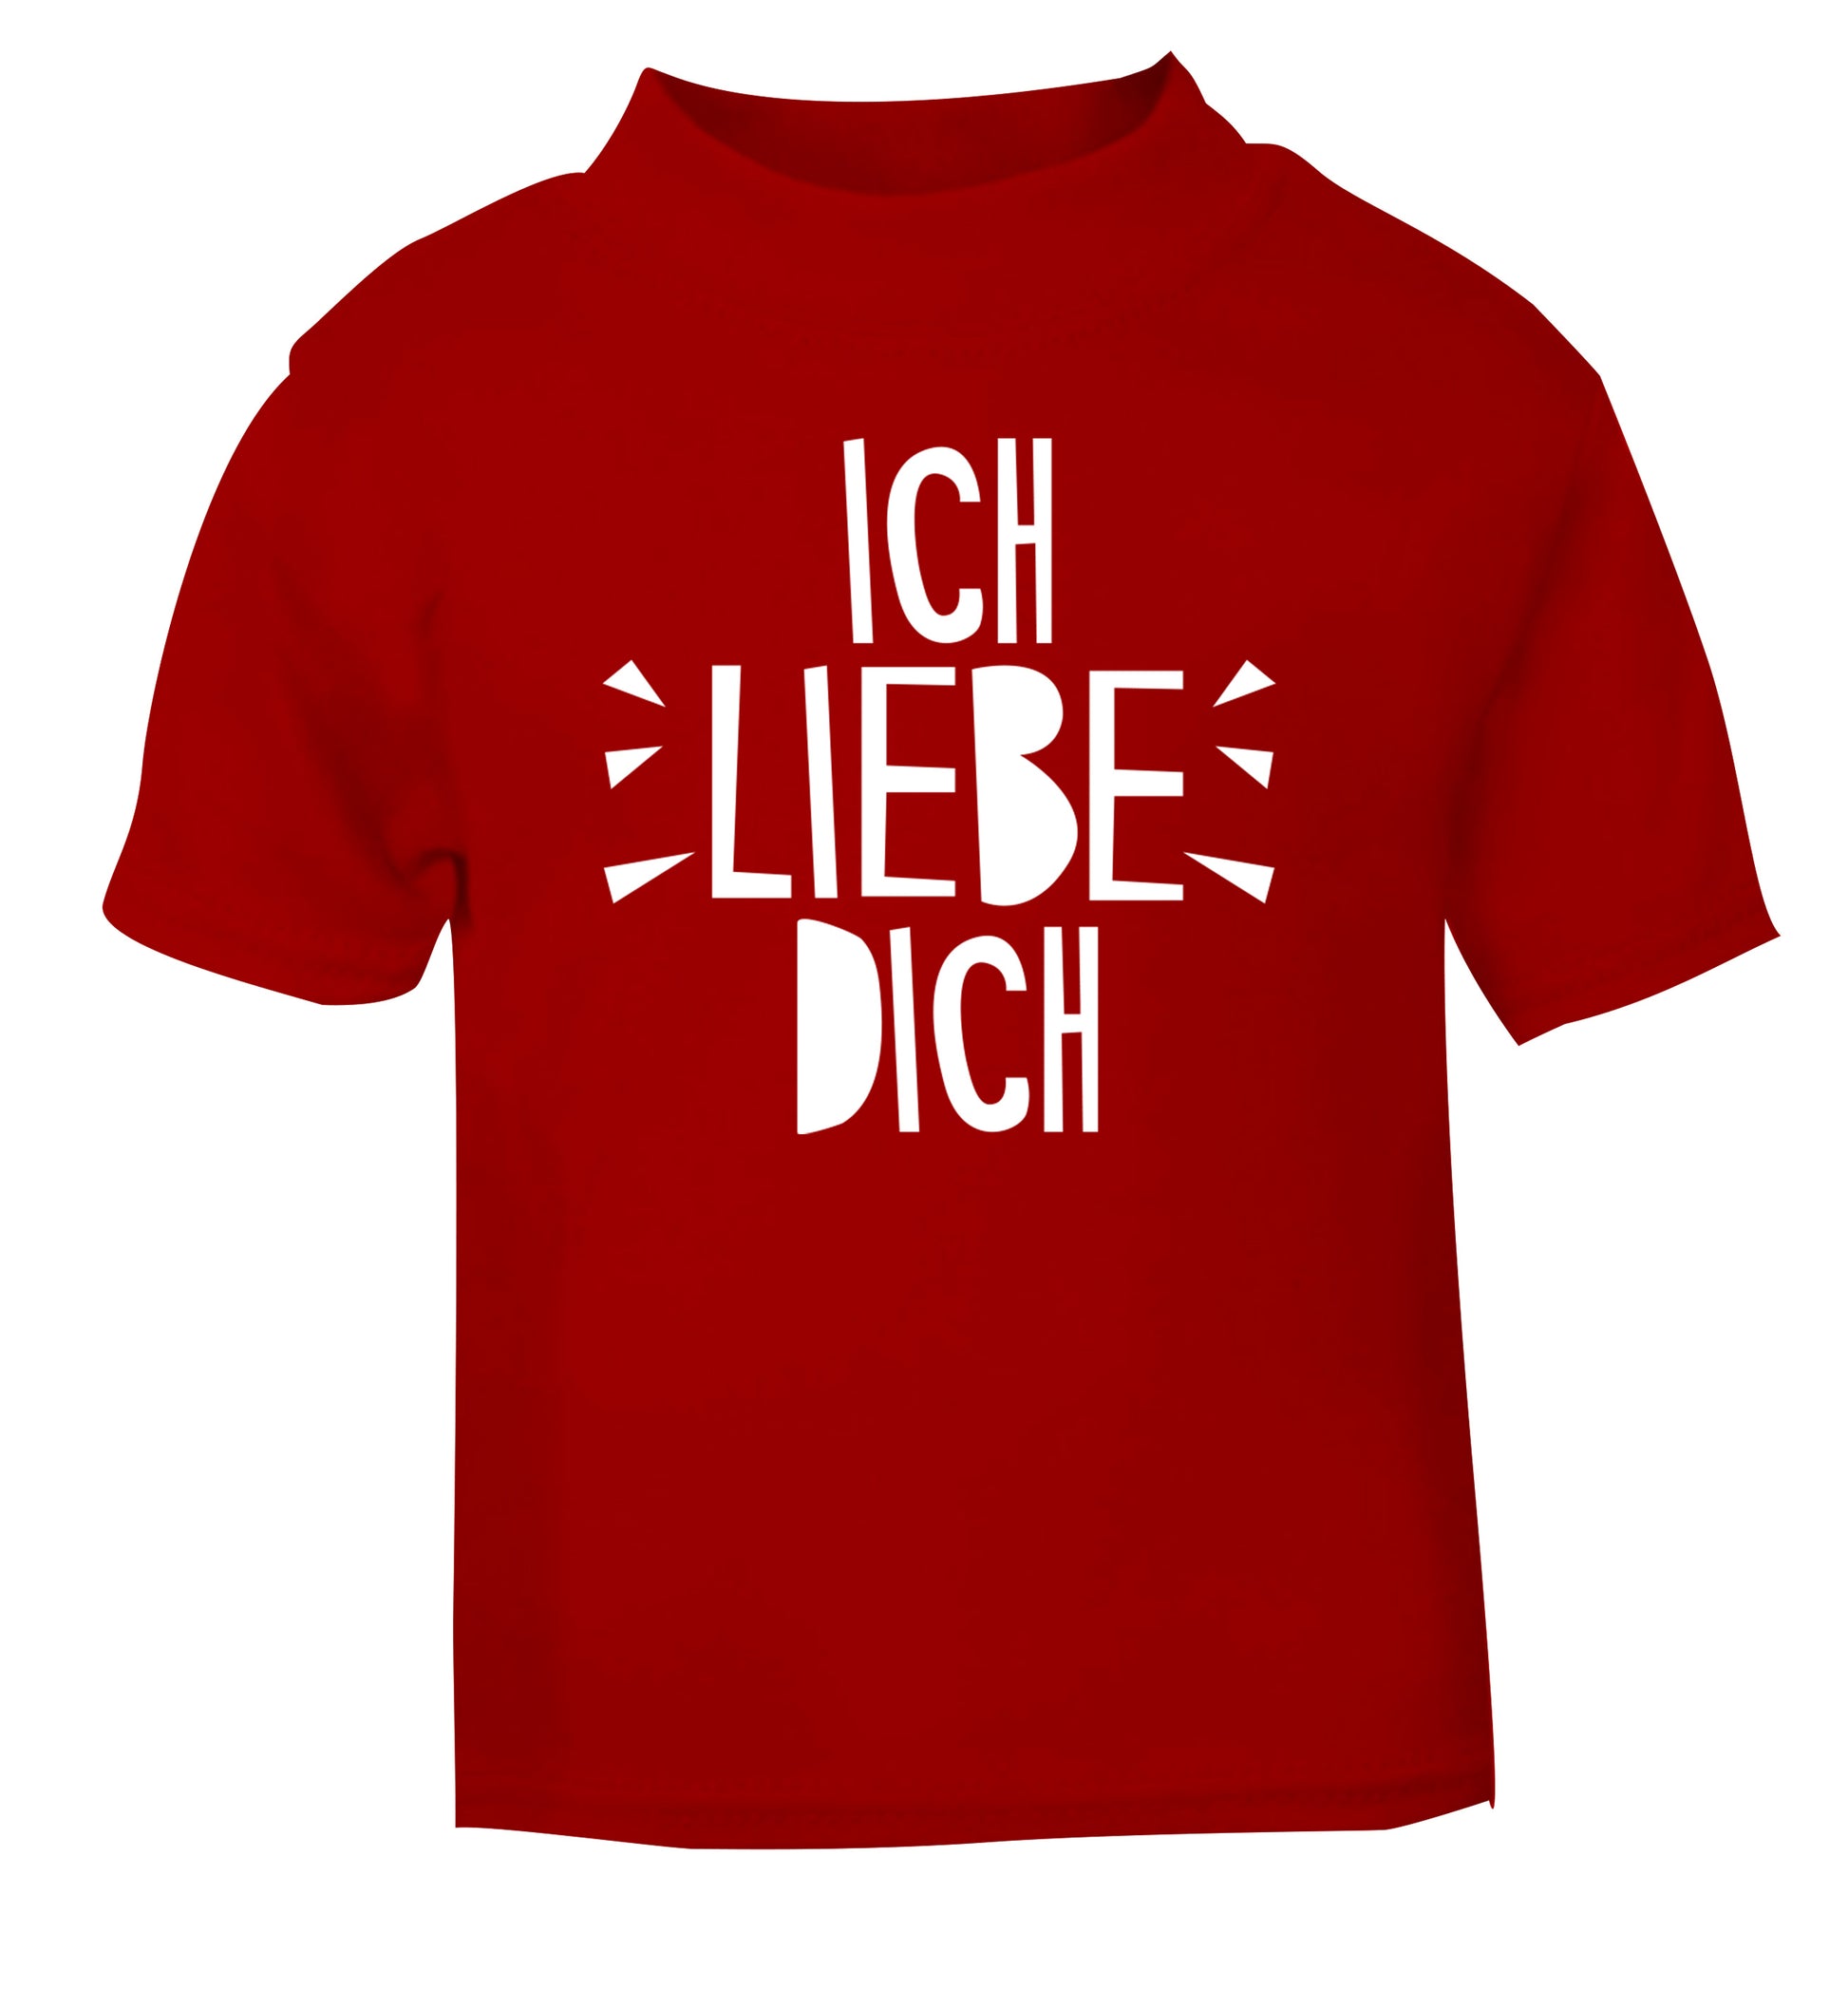 Ich liebe dich - I love you red Baby Toddler Tshirt 2 Years